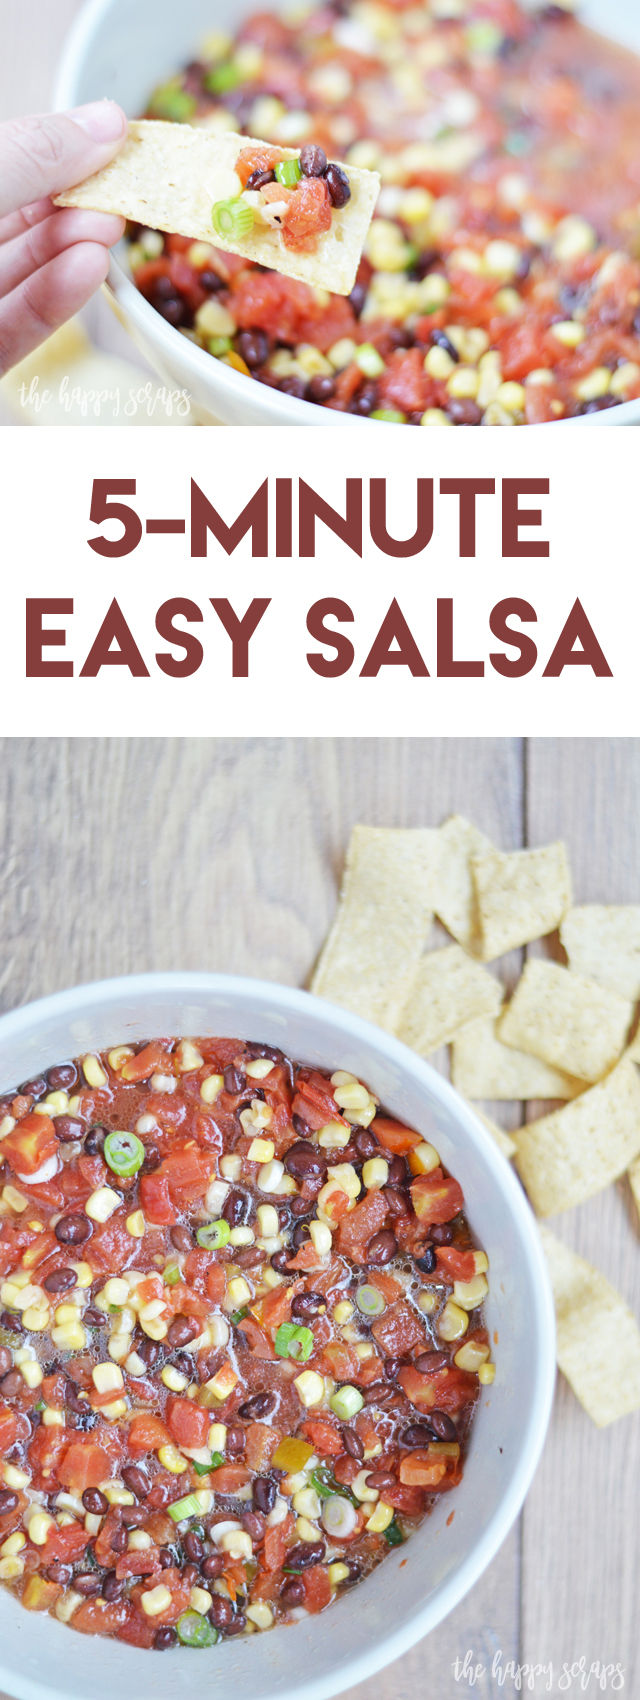 With this 5-Minute Easy Salsa recipe you're mouth won't be watering for long before you get to taste it! Perfect for New Year's or your next party.